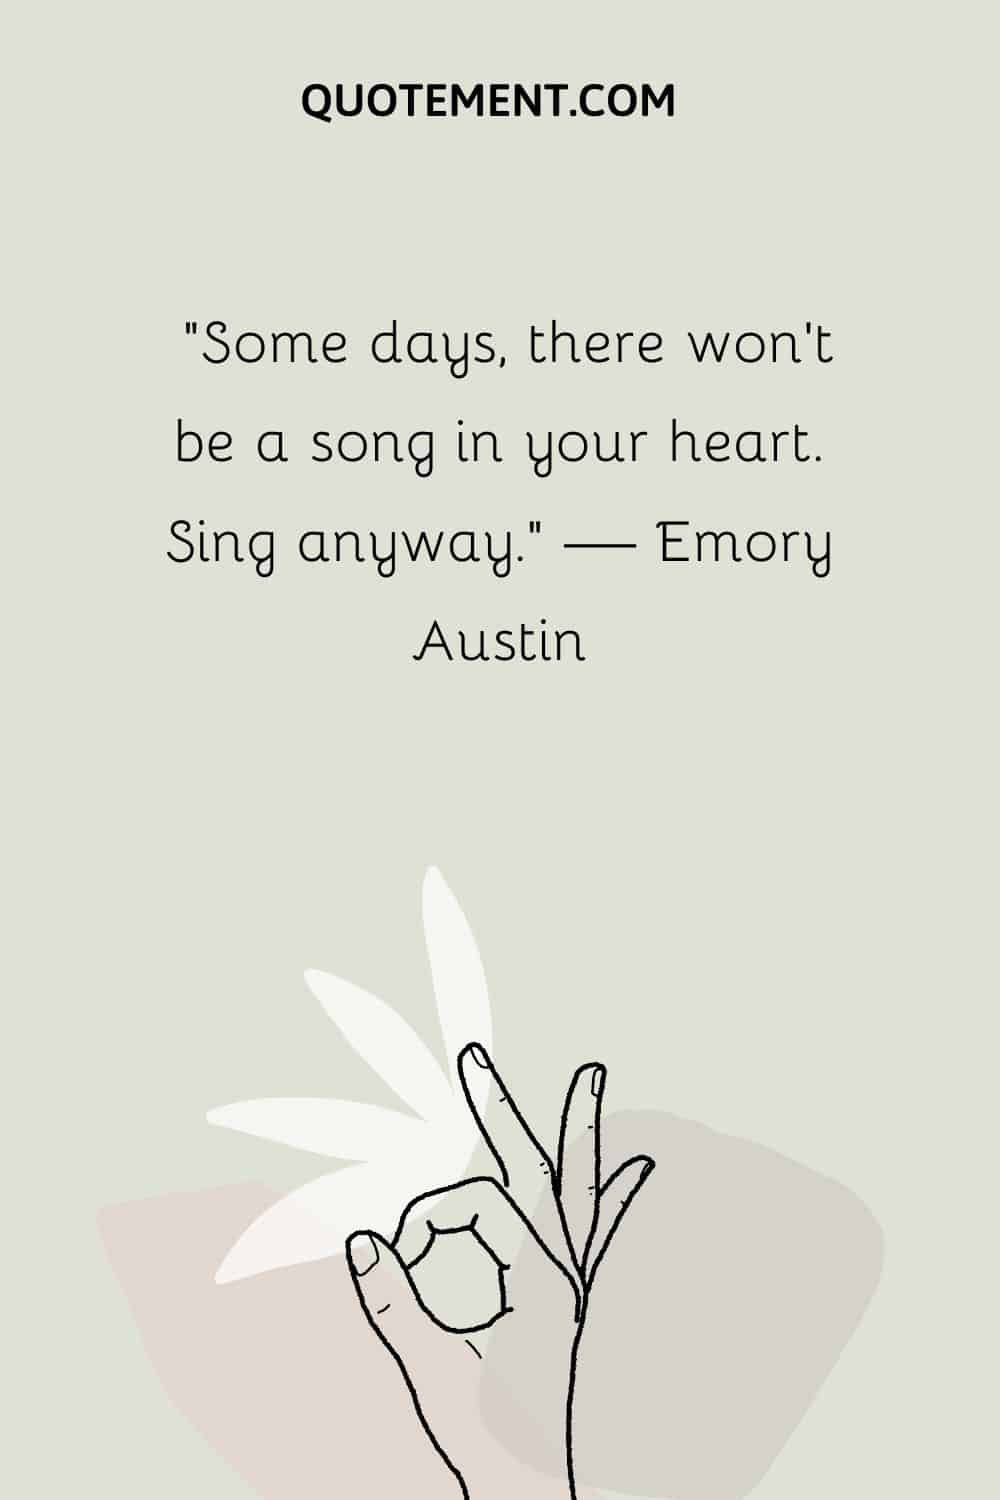 “Some days, there won’t be a song in your heart. Sing anyway.” — Emory Austin